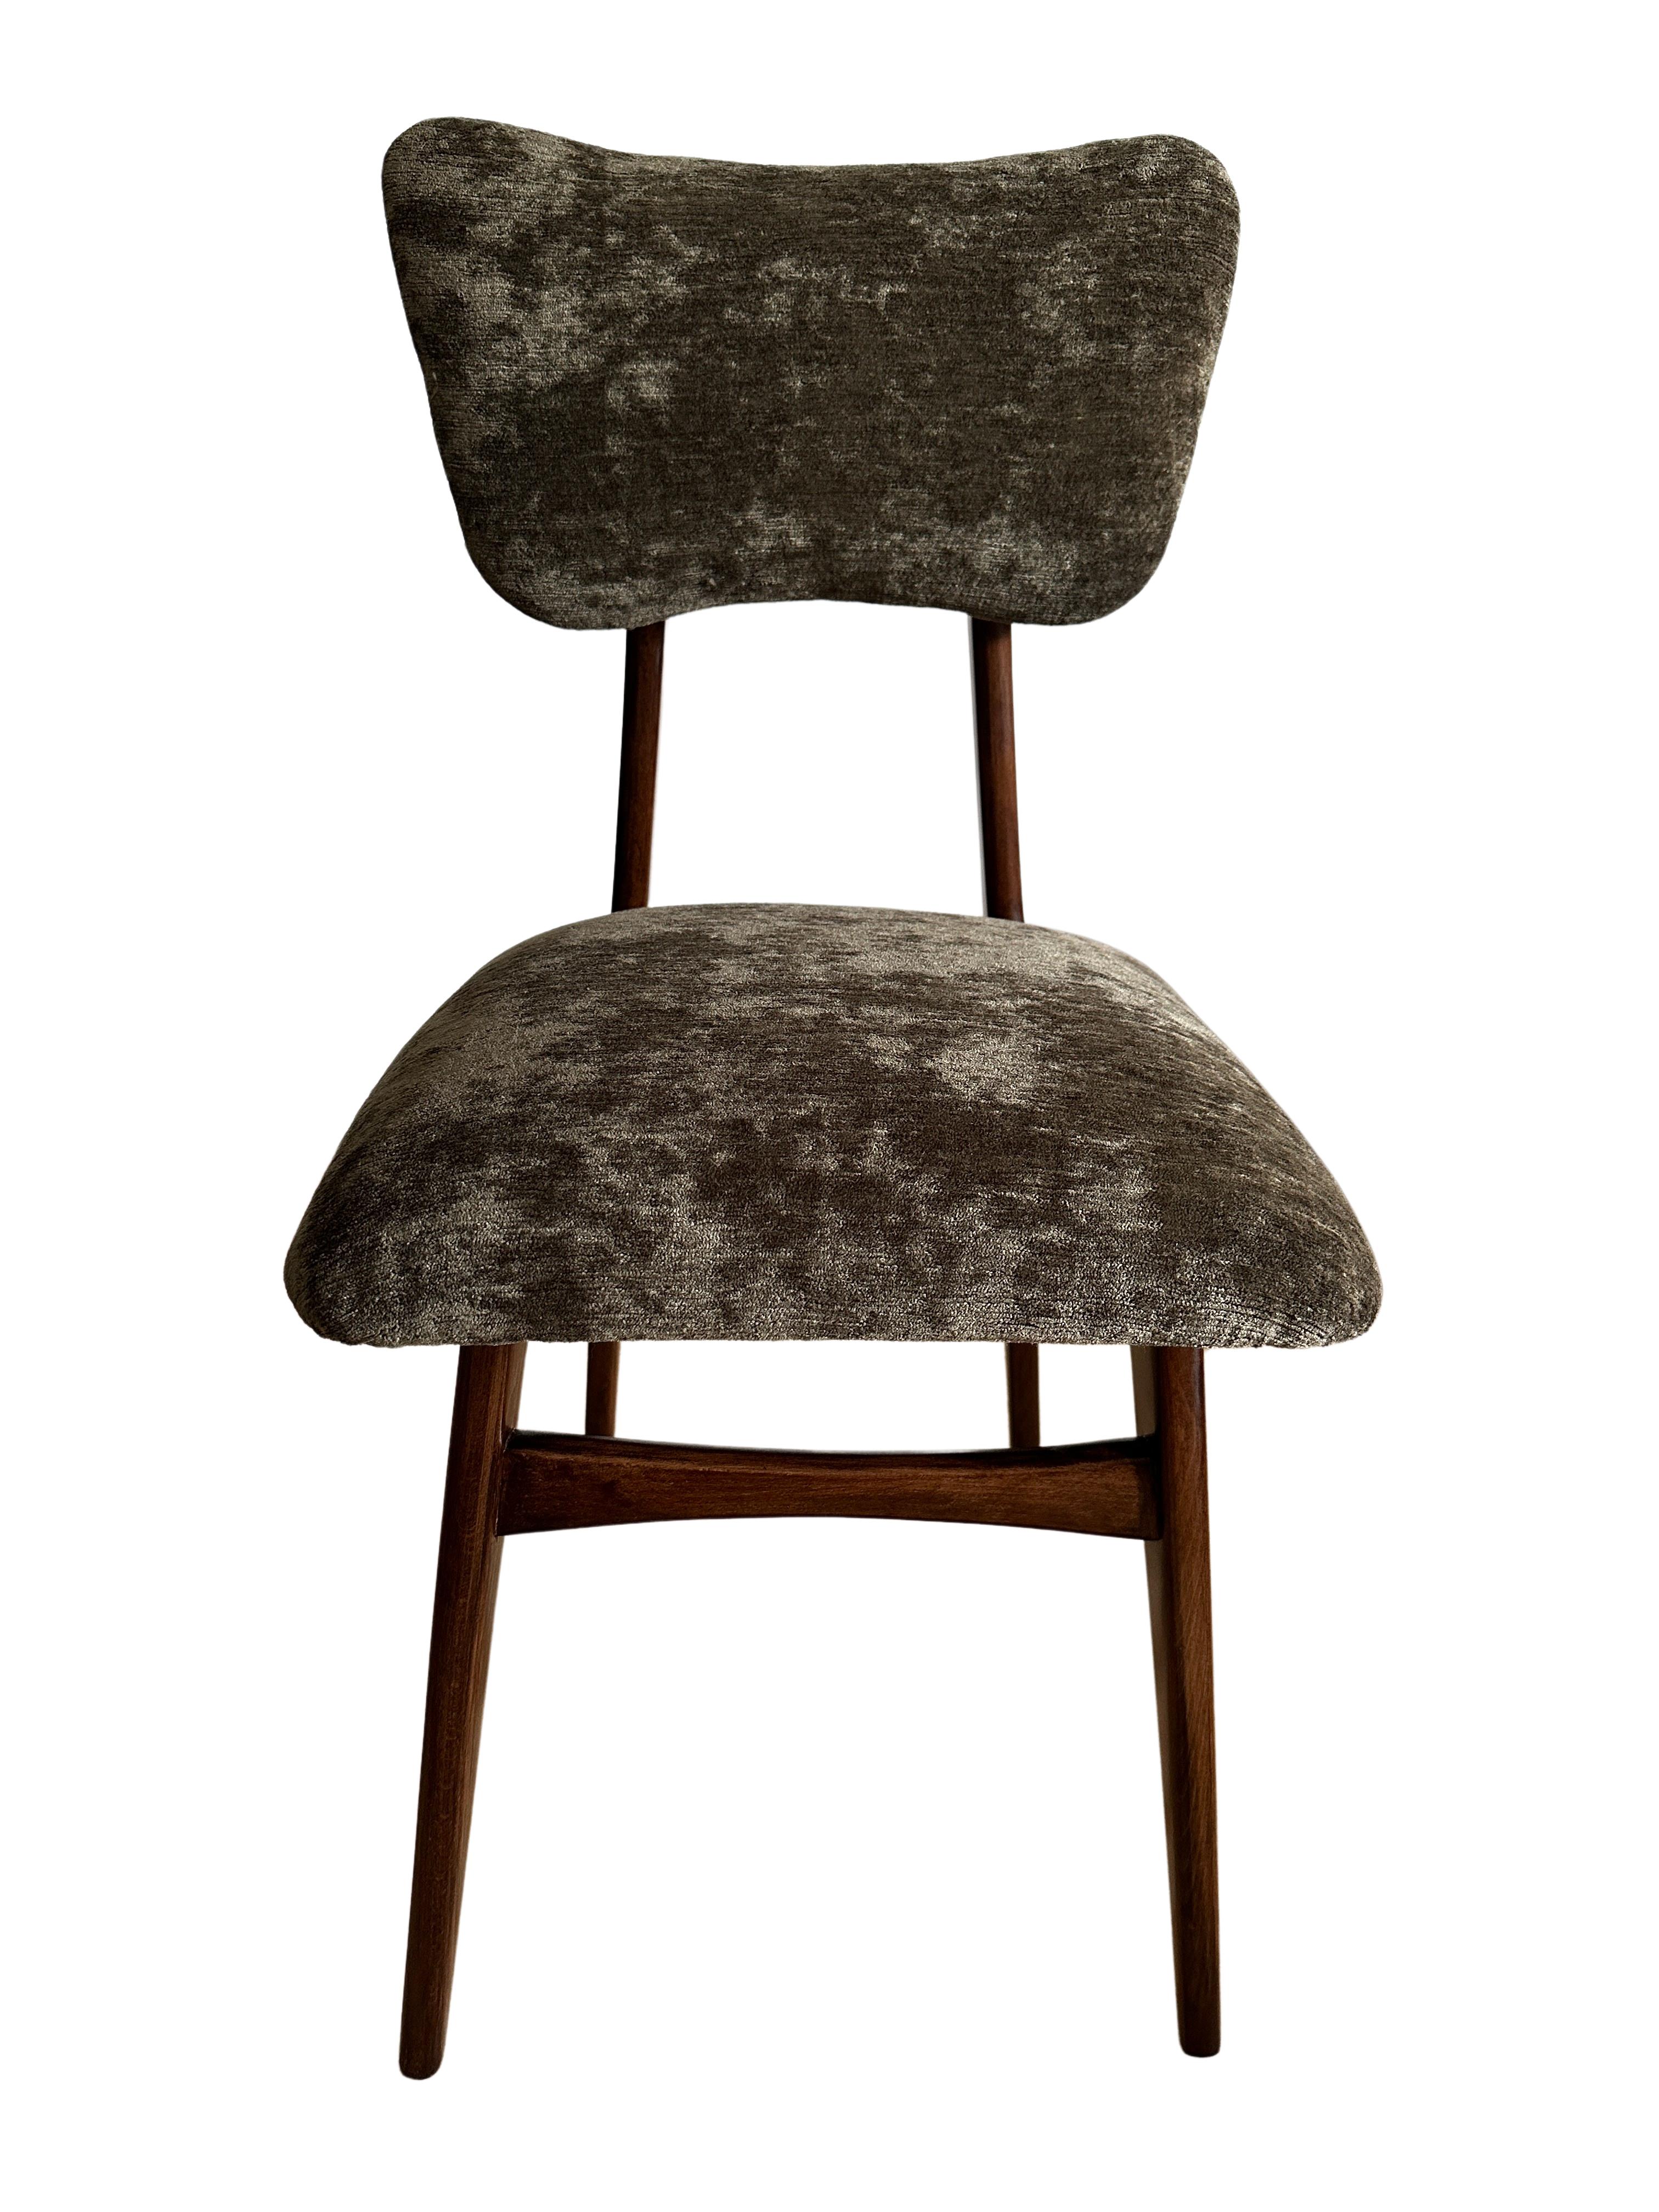 Bouclé Set of Four Midcentury Dining Chairs in Green Velvet Upholstery, Poland, 1960s For Sale